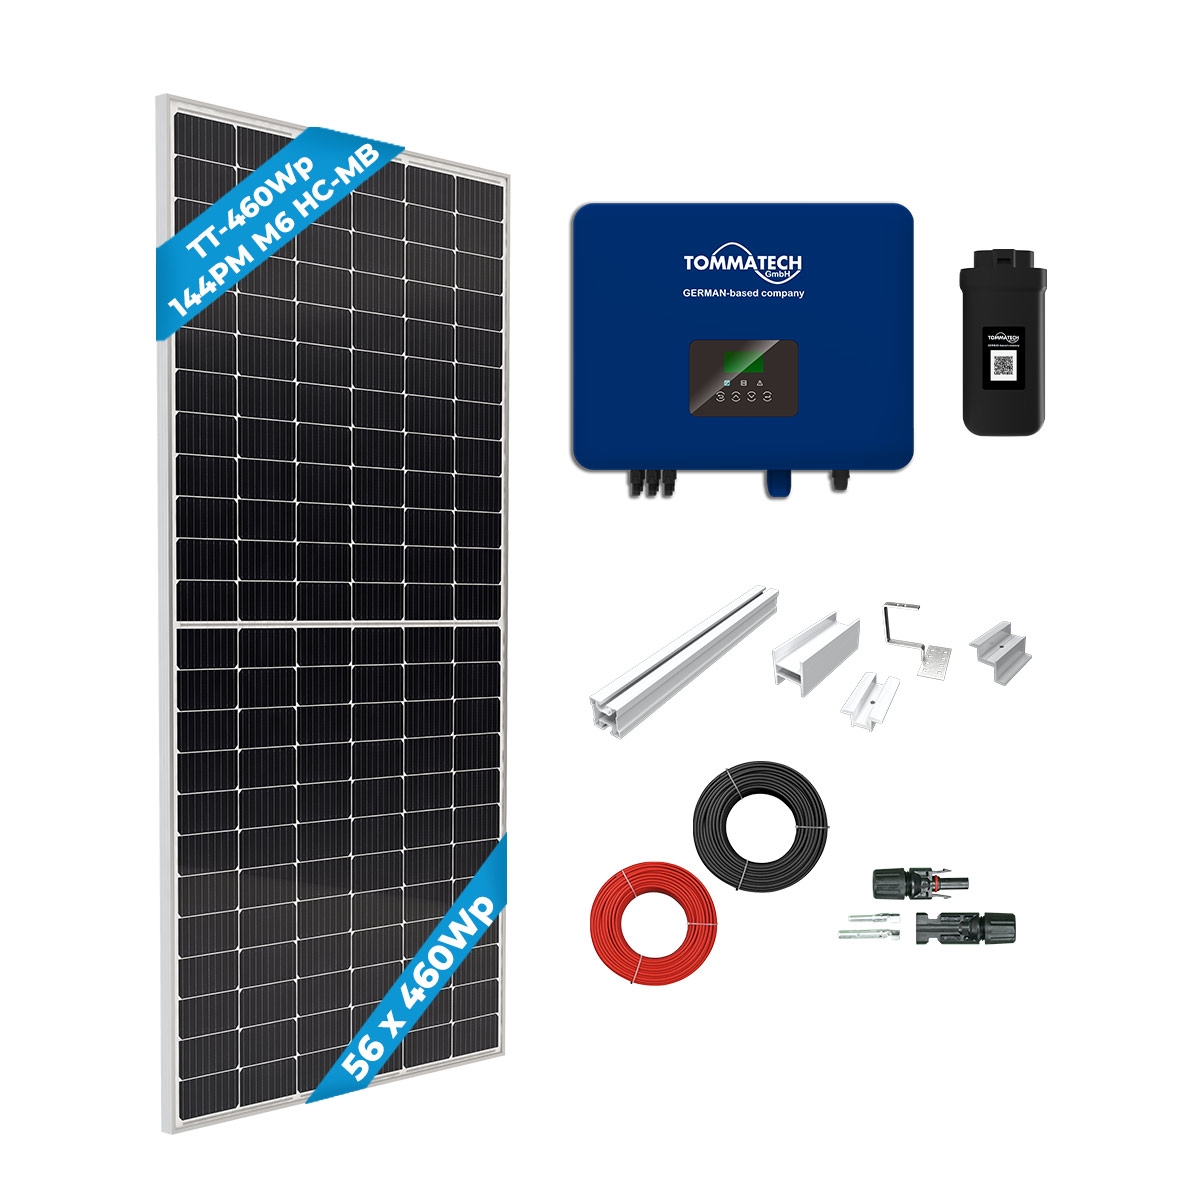 TommaTech 25kWe Tile Roof Three Phase On-Grid Solar Package